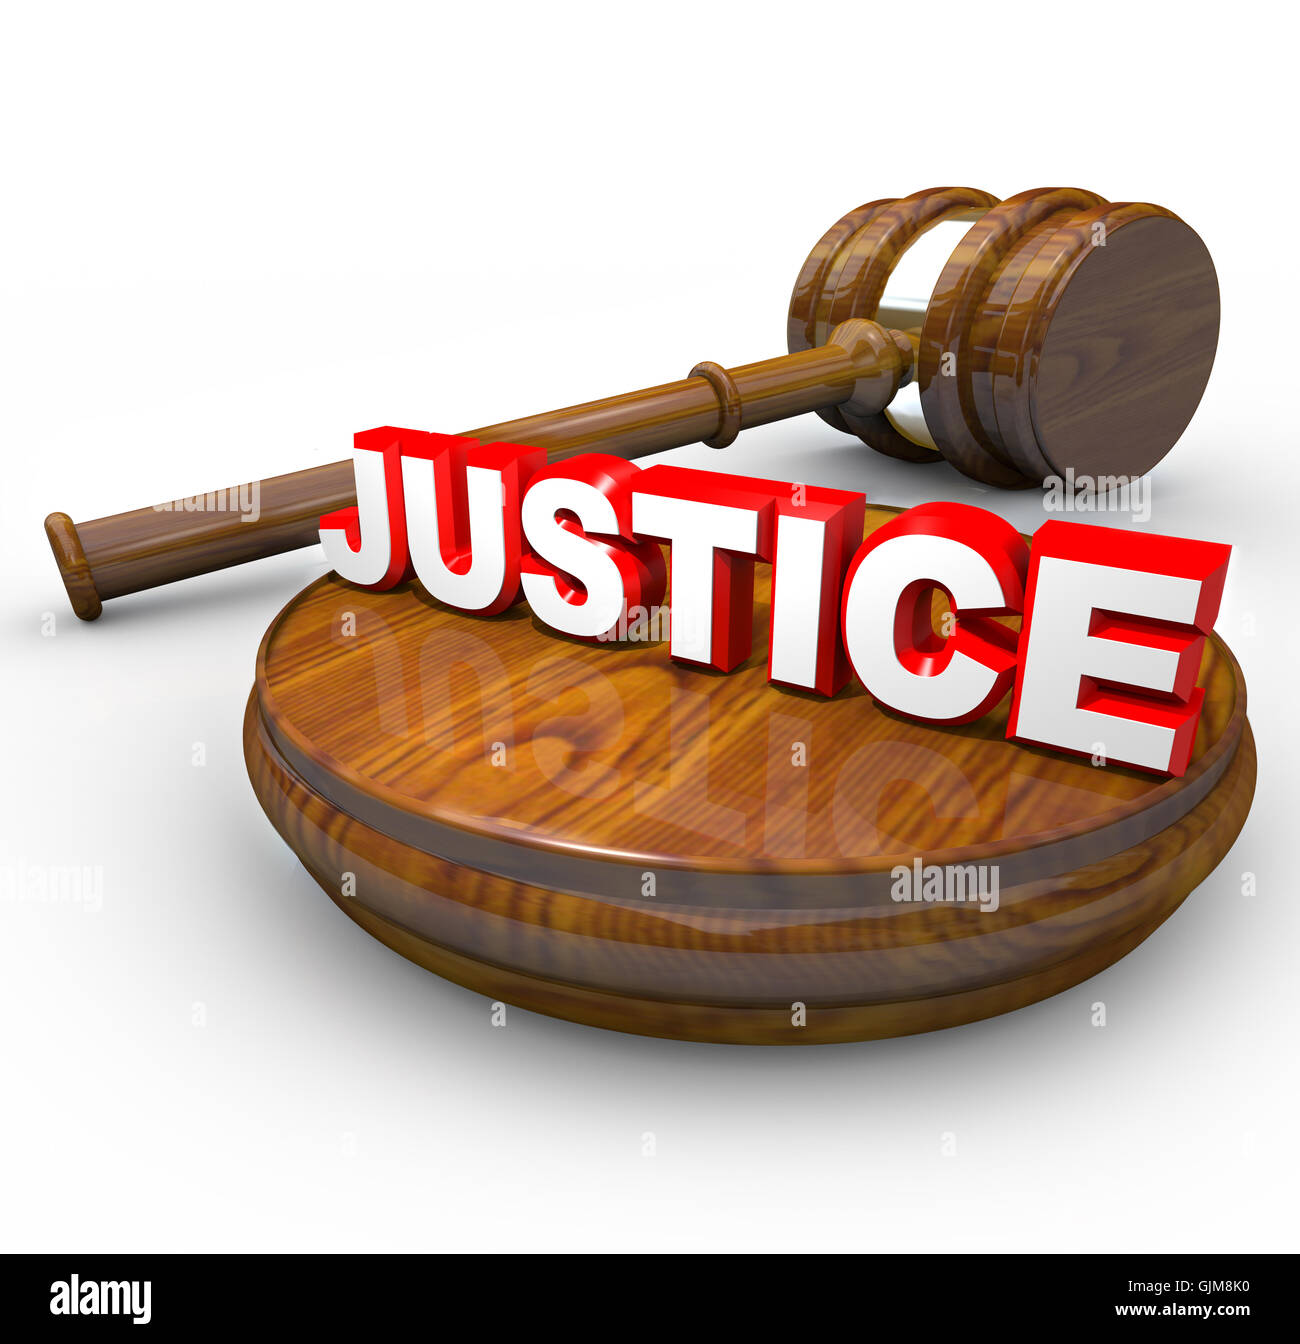 Justice - Judge Gavel and Word Stock Photo